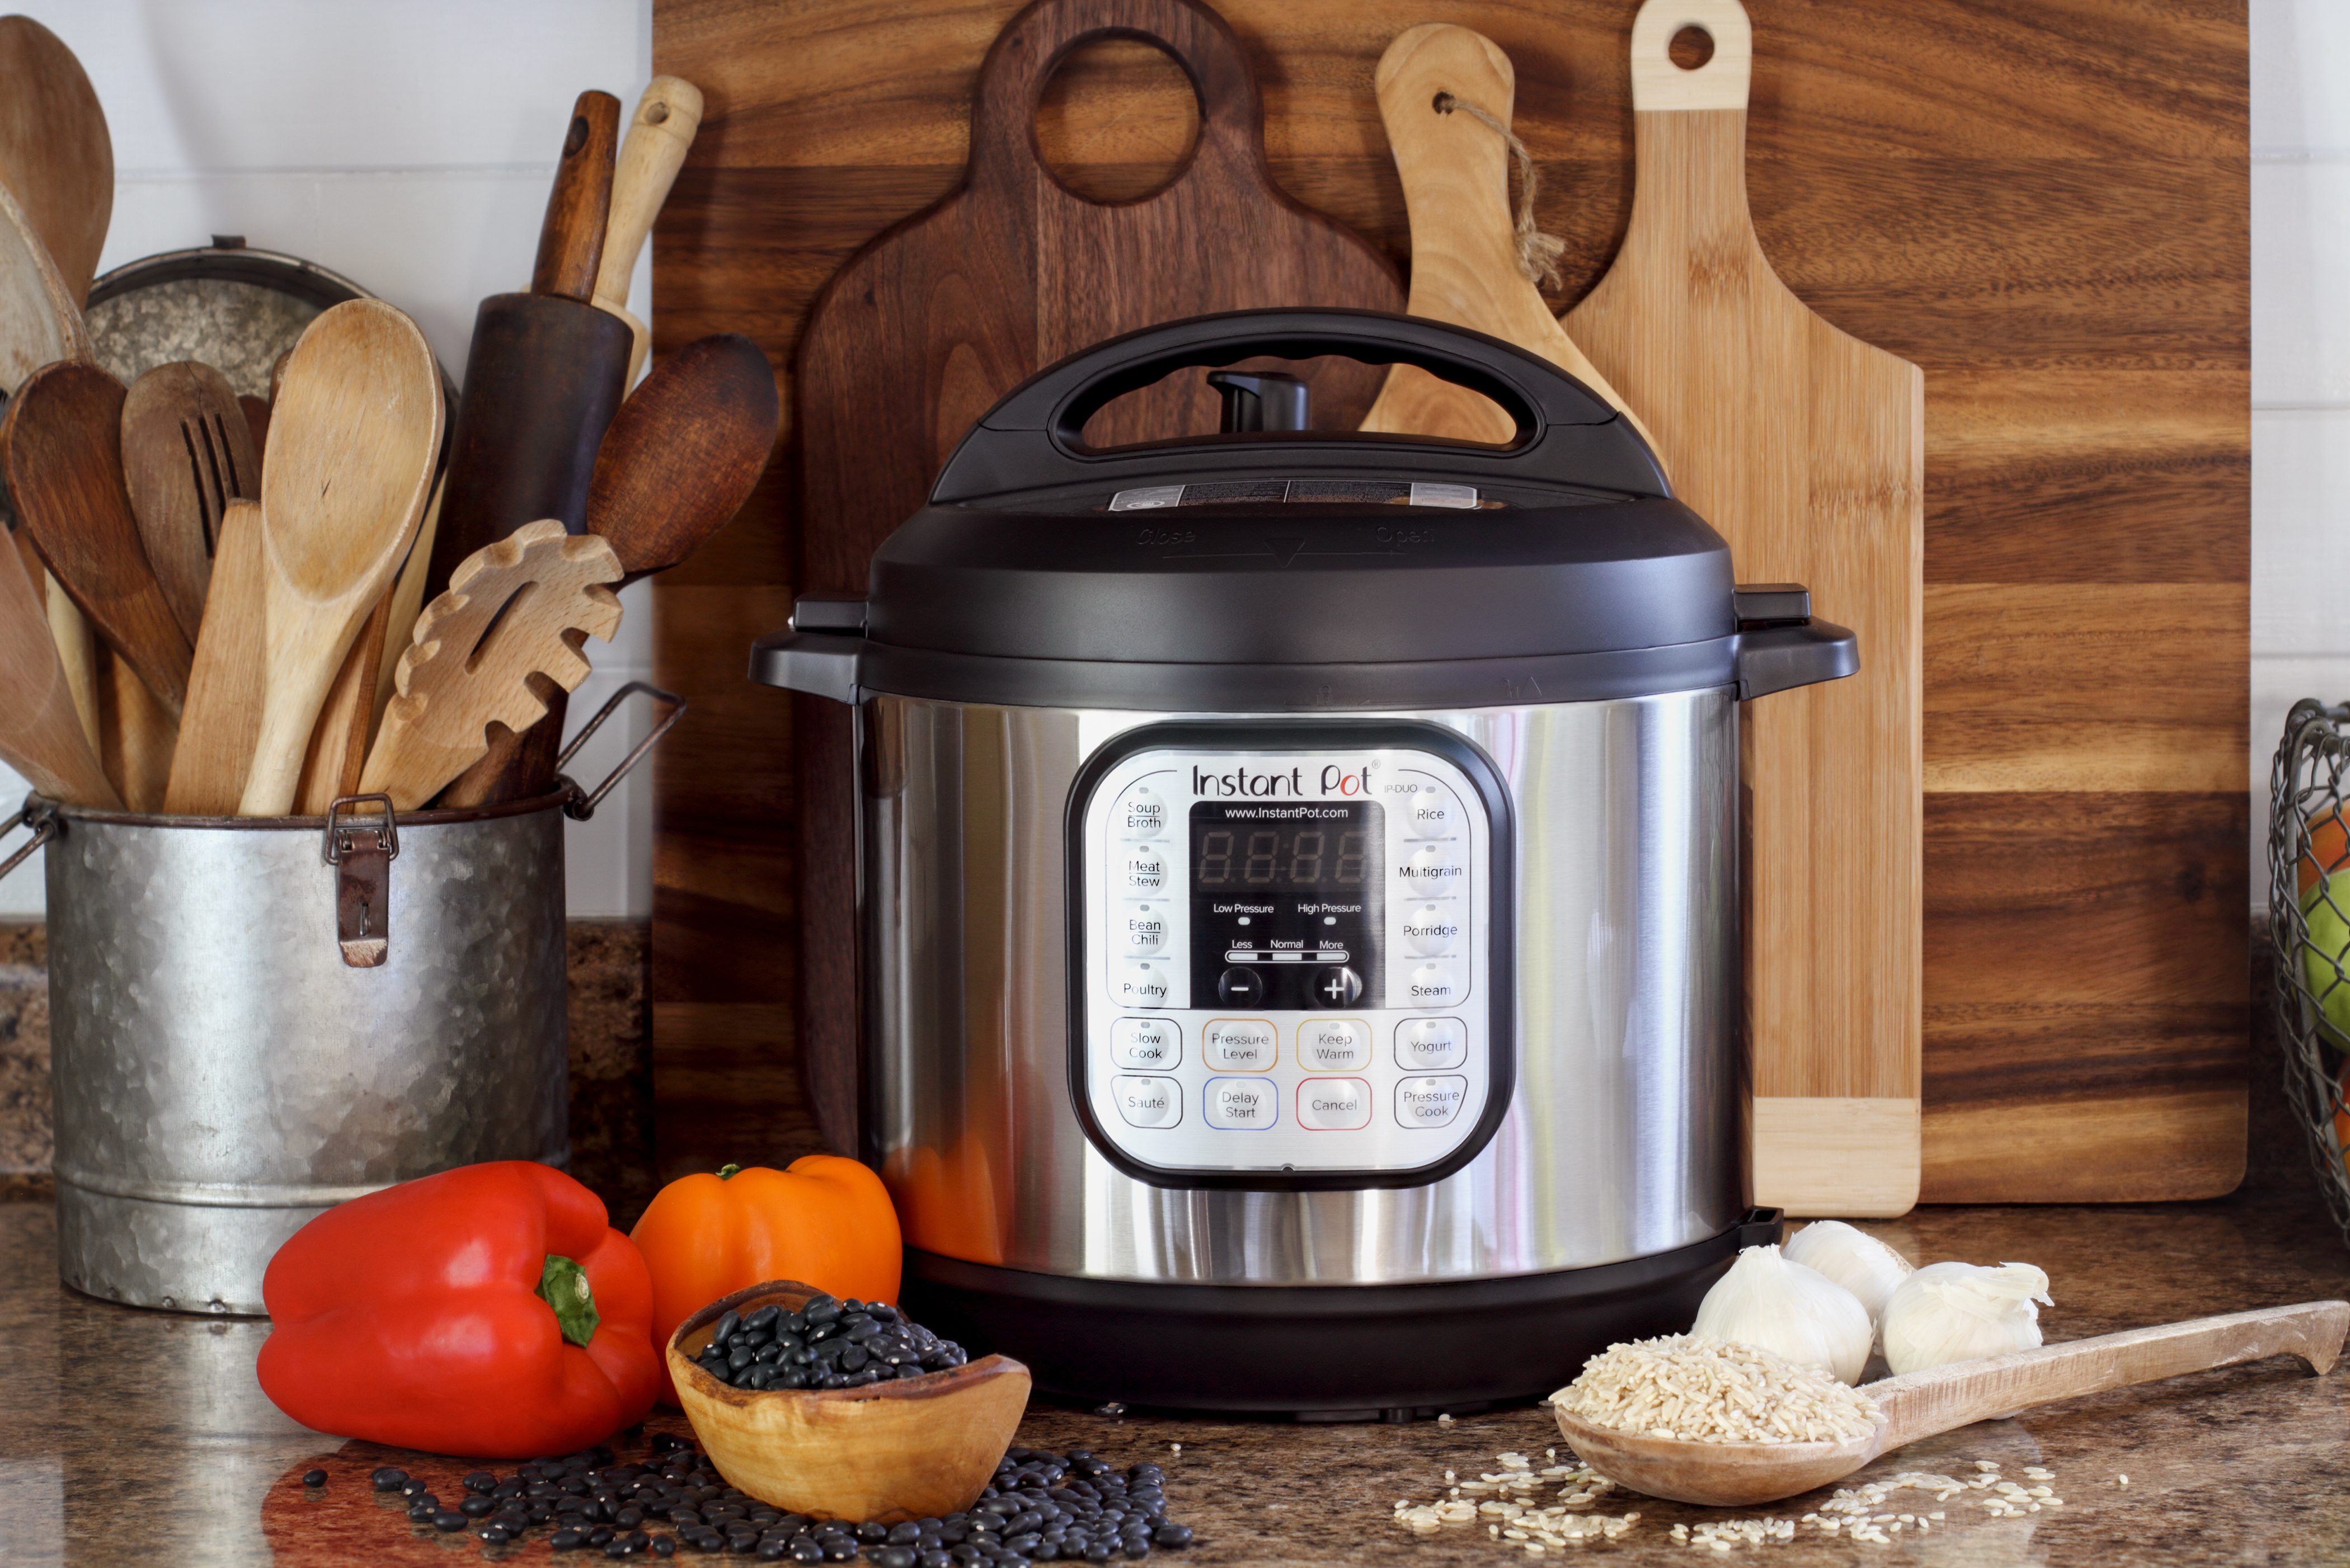 10 Healthy Instant Pot Recipes We're Loving for Winter